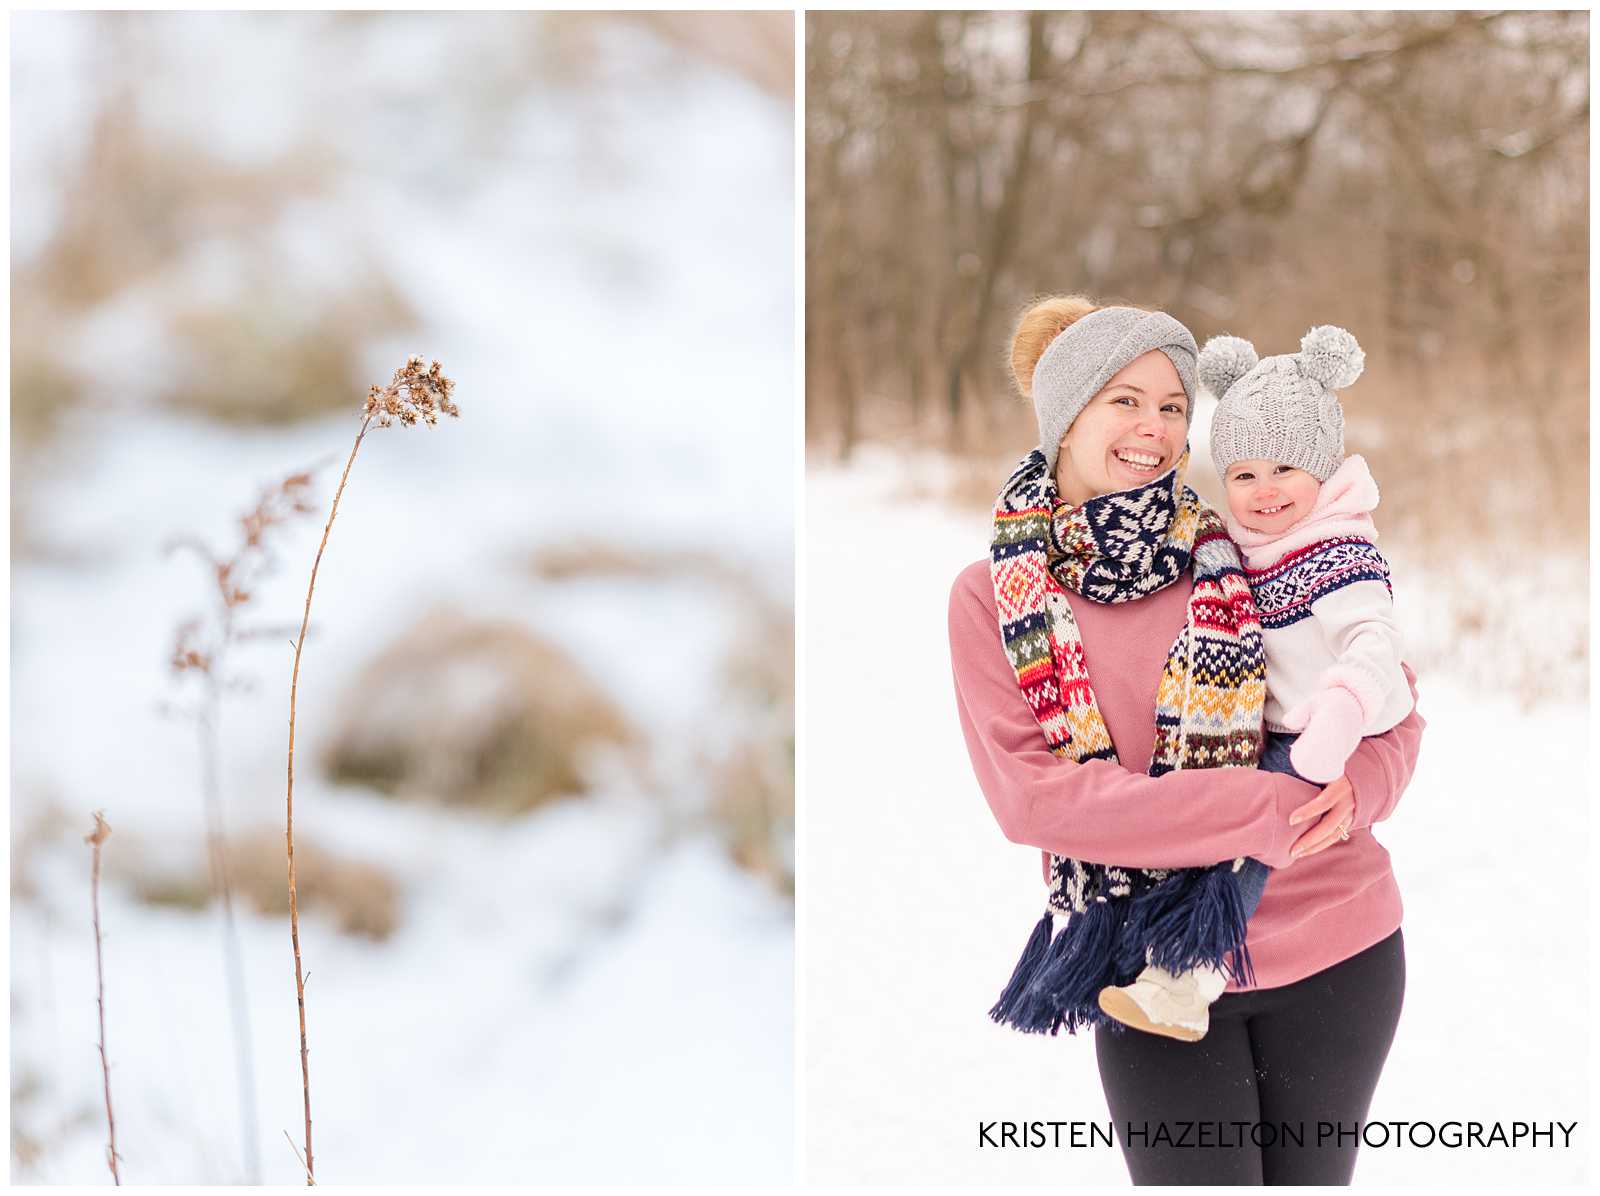 Snowy photos in Oak Park of a mom and toddler wearing snow gear